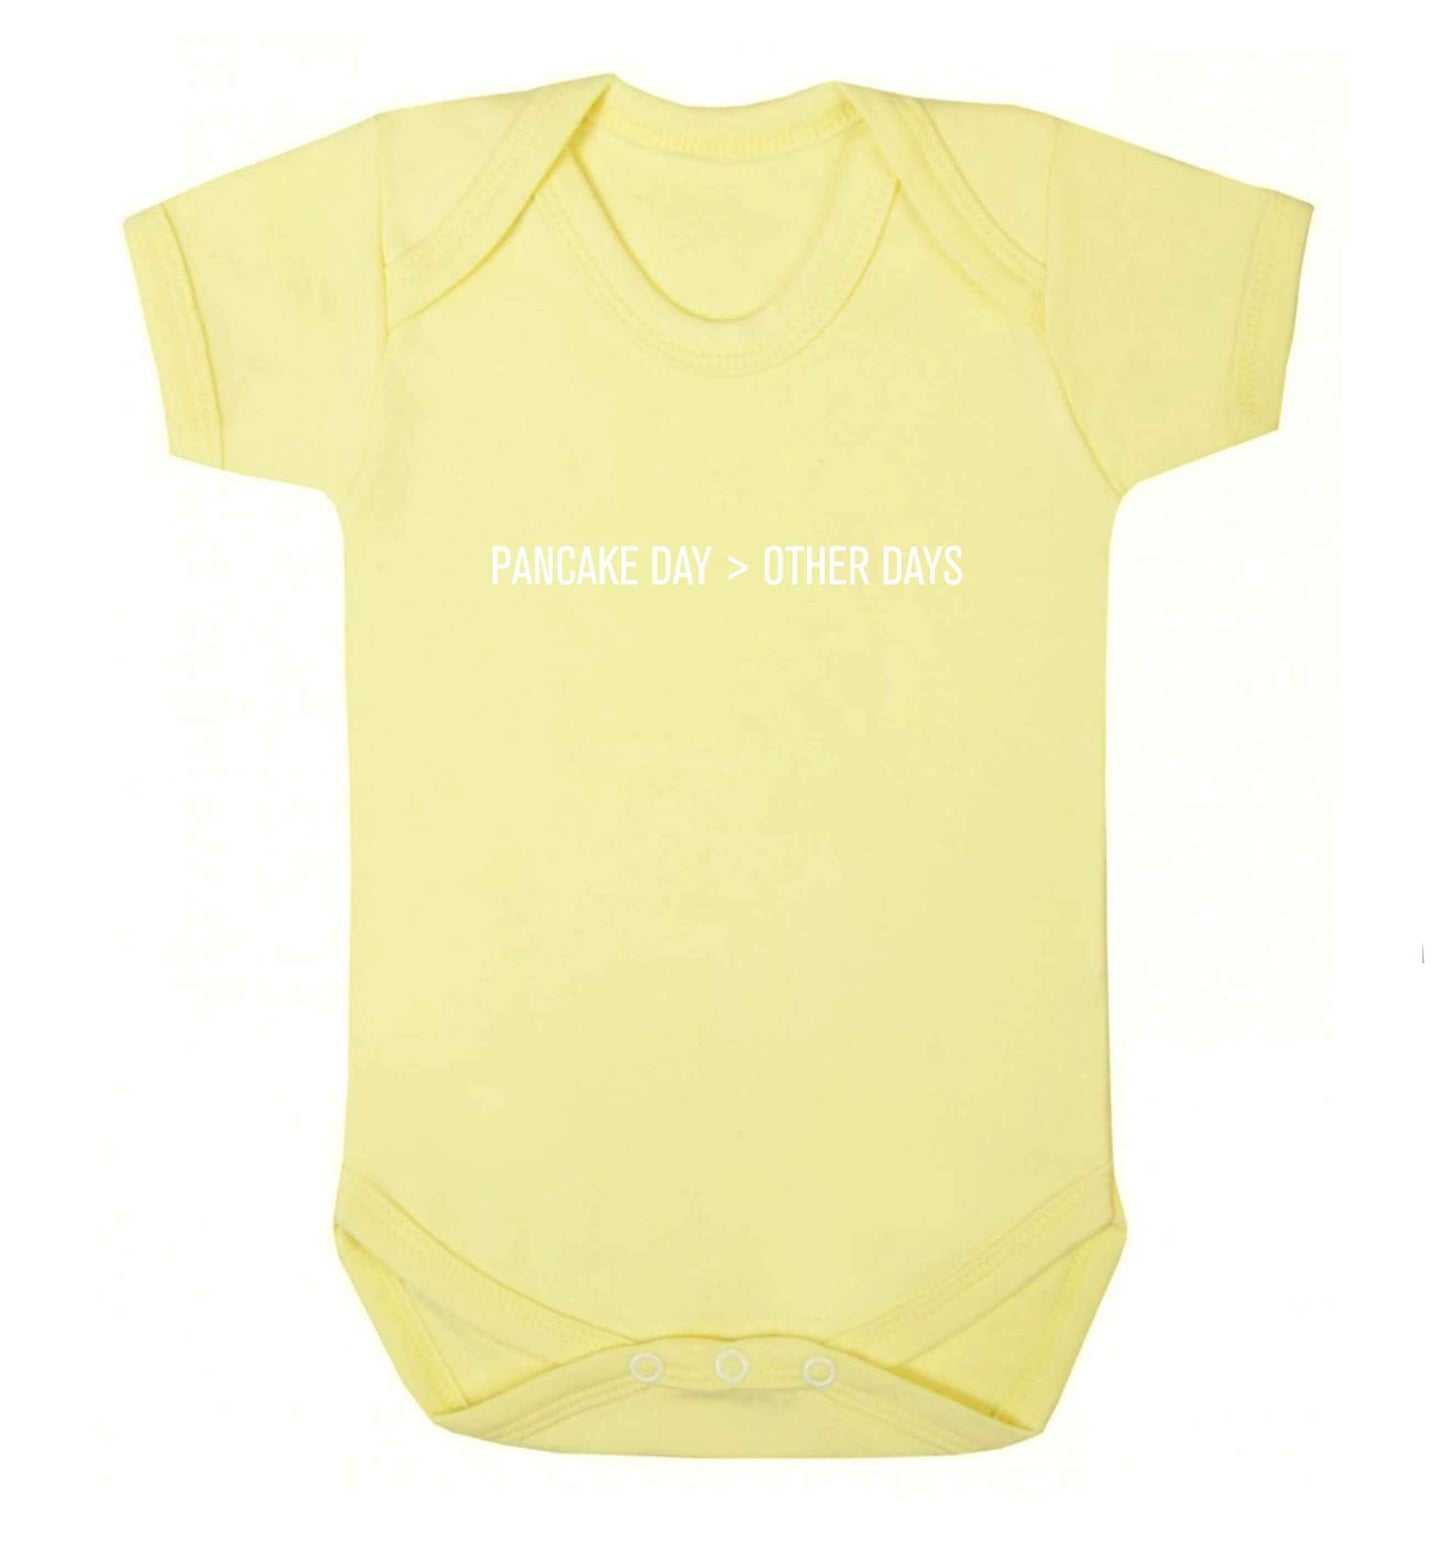 Pancake day > other days baby vest pale yellow 18-24 months